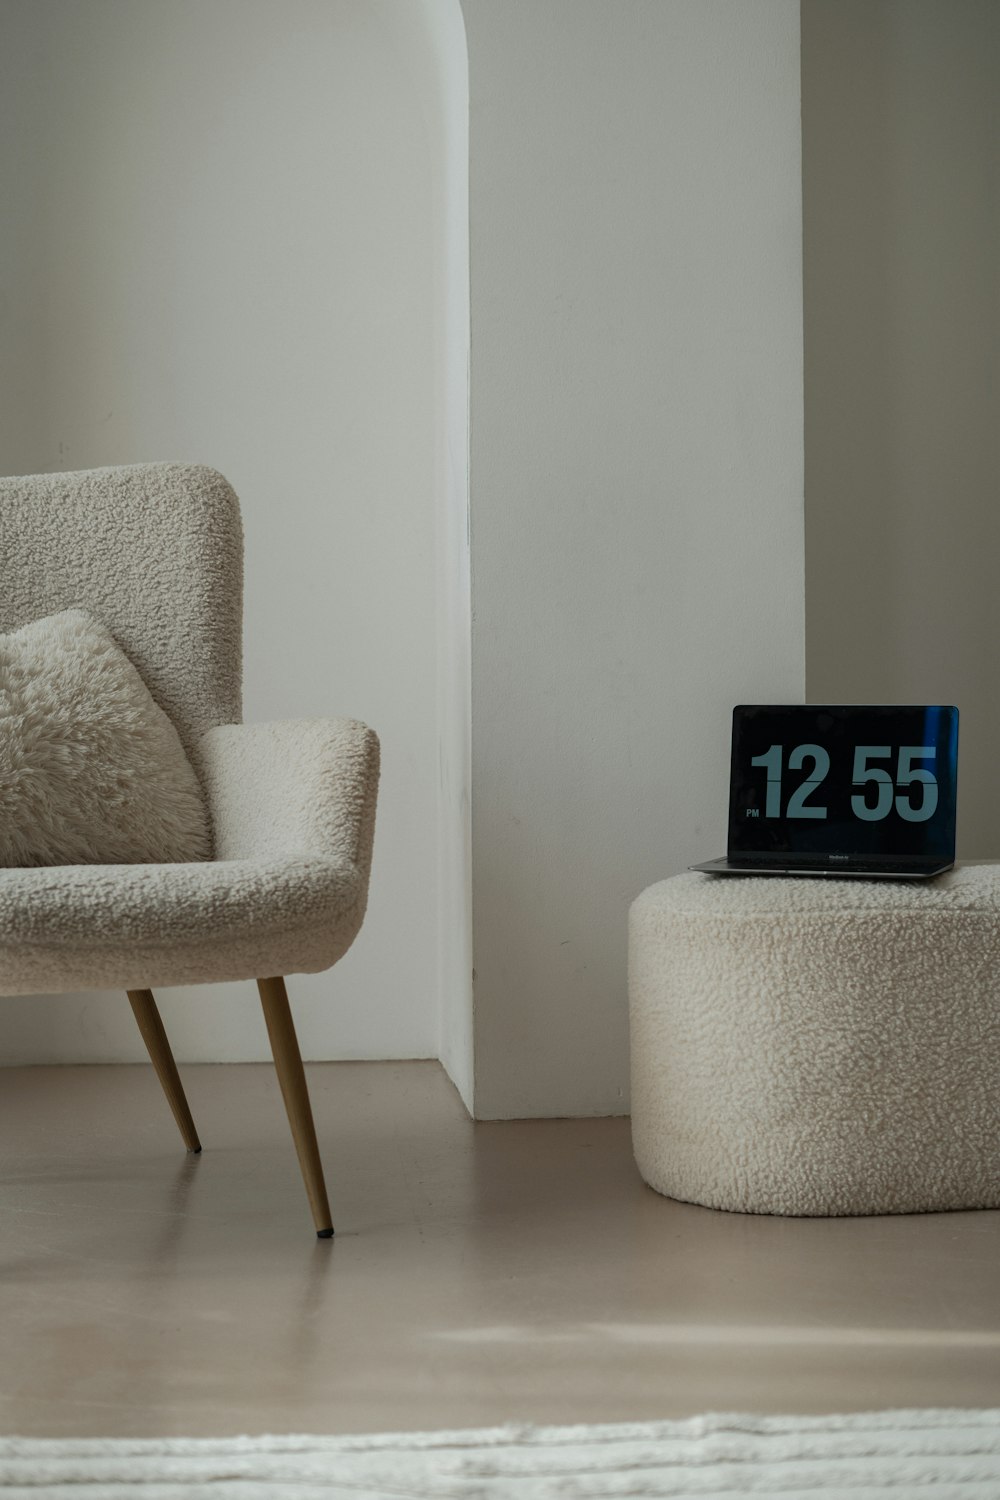 a chair and ottoman in a room with a clock